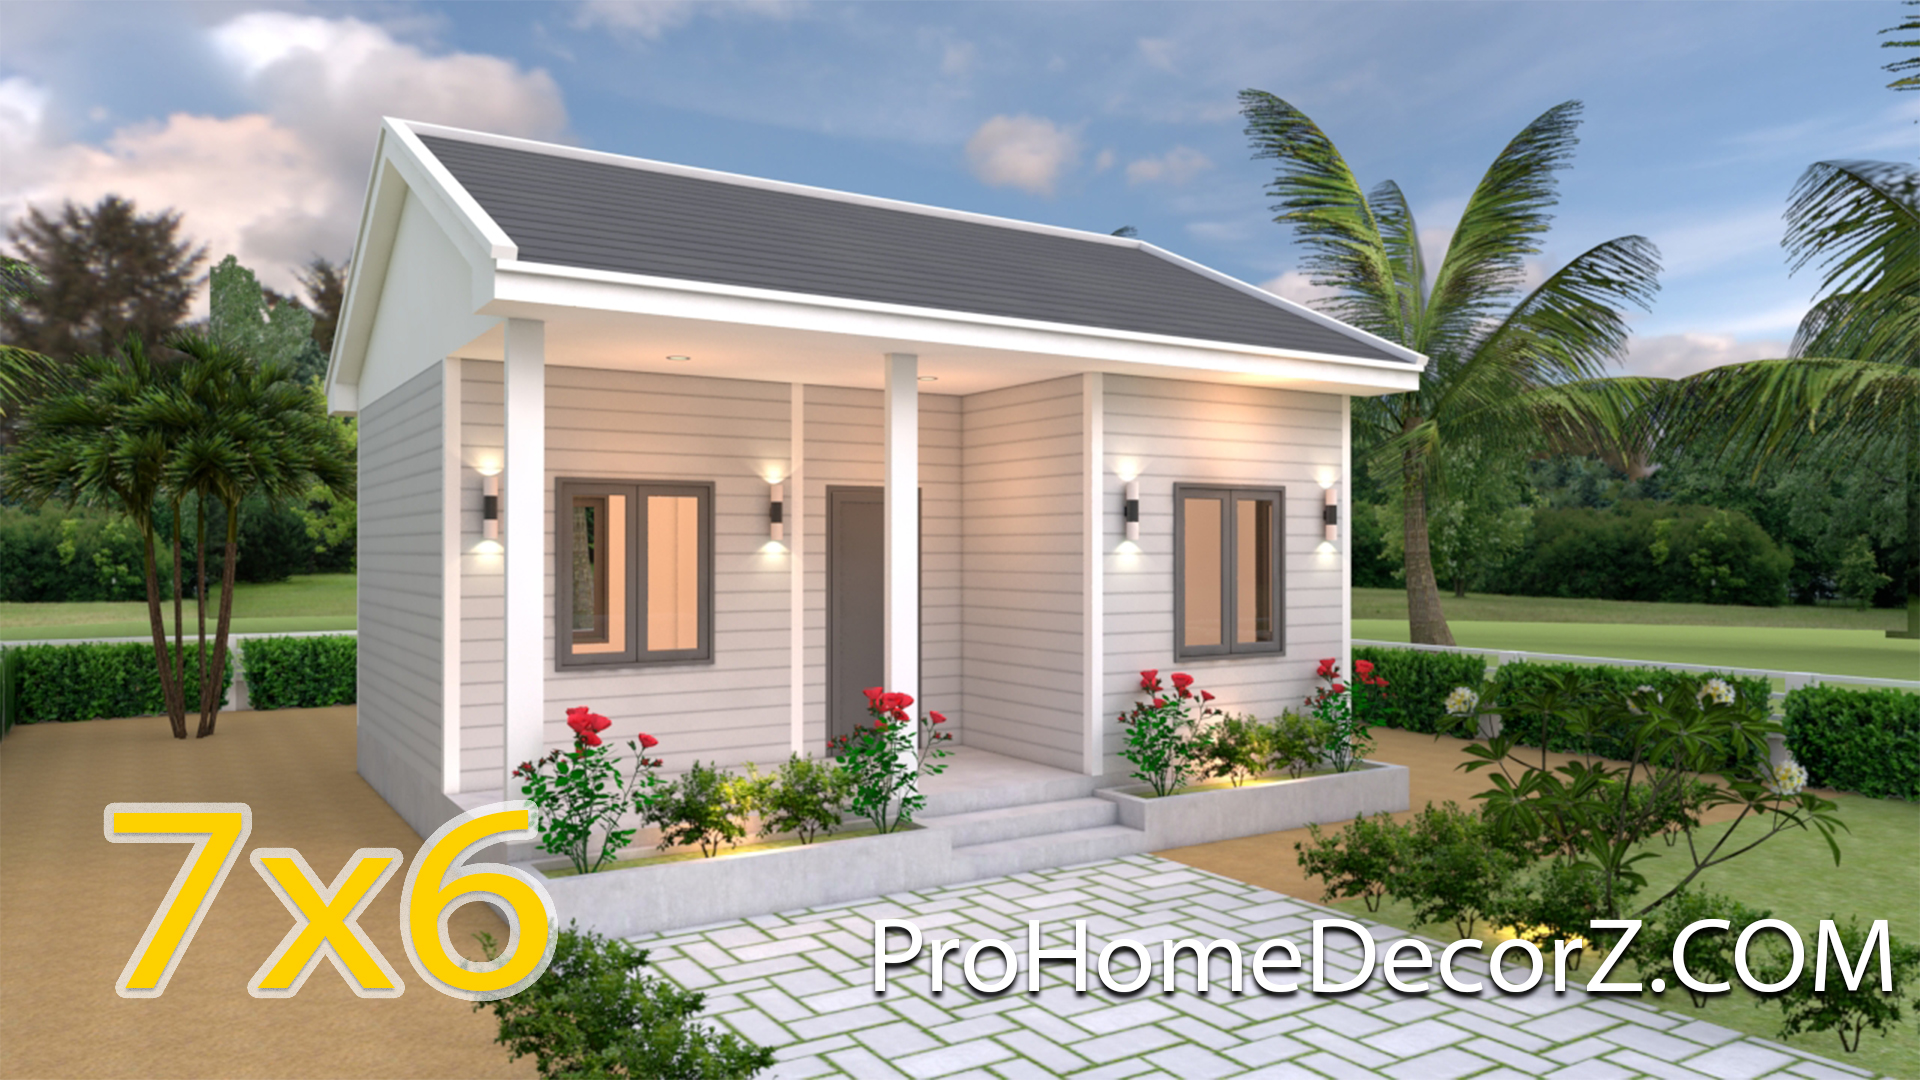 Small Home Designs 7x6 Gable Roof Pro